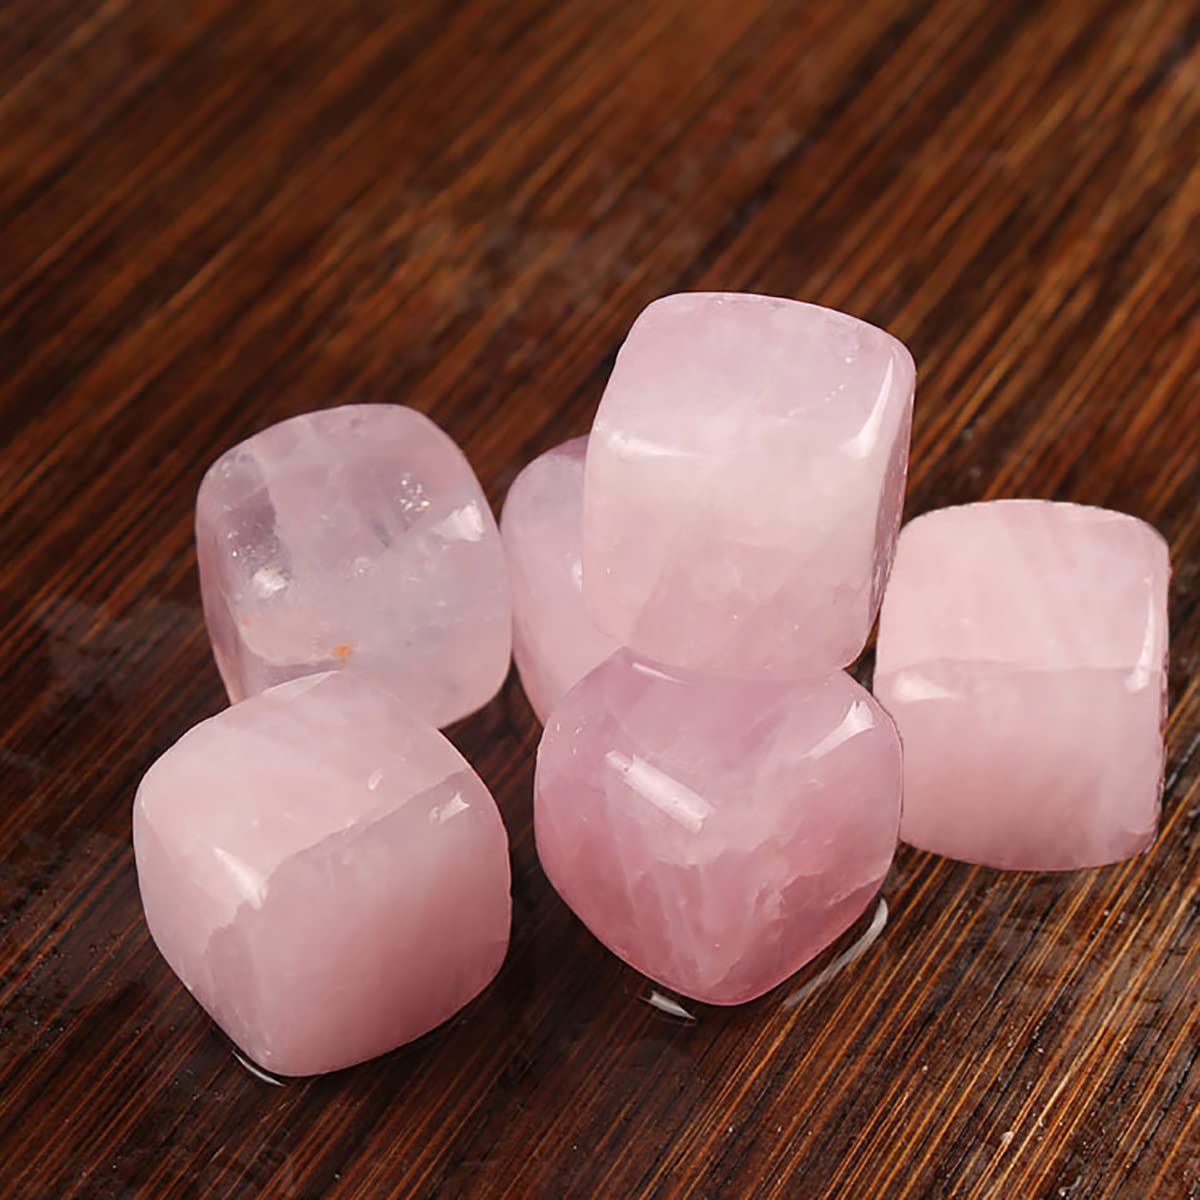 FZBHRO Rose Quartz Whiskey Stones Chilling Crystal Ice Cubes for Drinks Whiskey Rocks 0.7-0.8" Wine Cubes Gifts for Women Set of 6